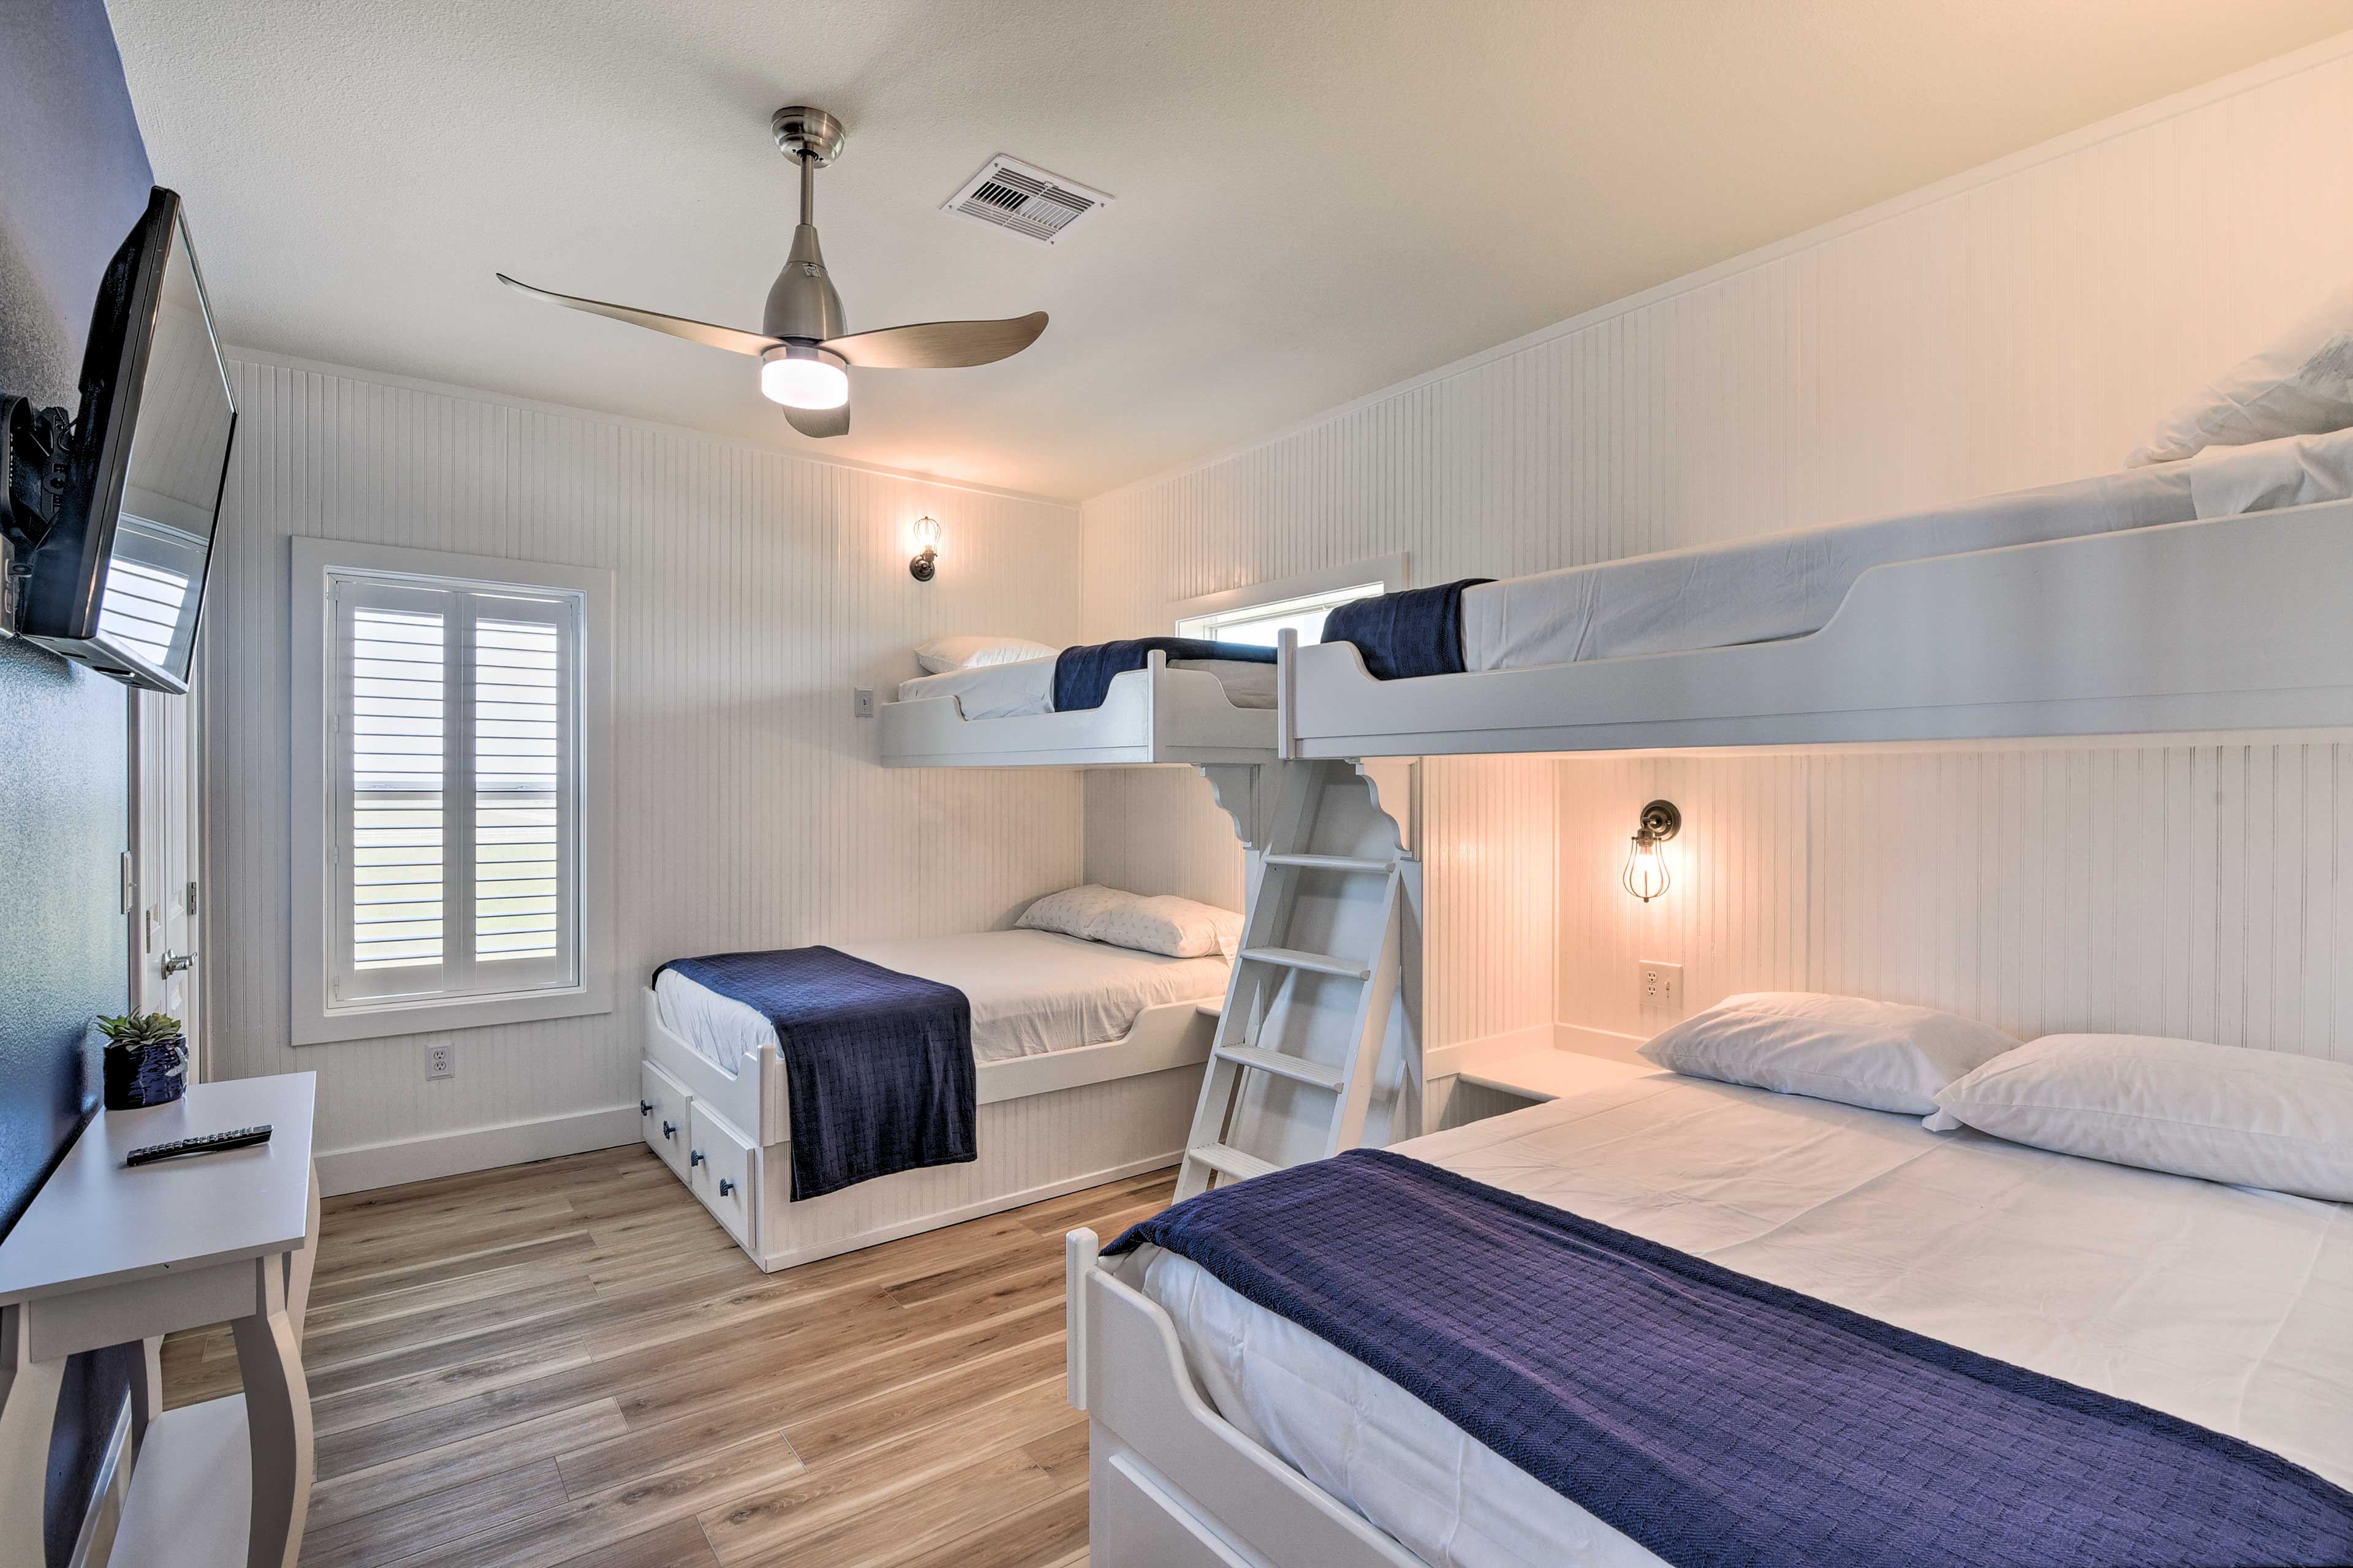 Bedroom 3 | 2 Twin/Full Bunk Beds | Linens & Towels Provided